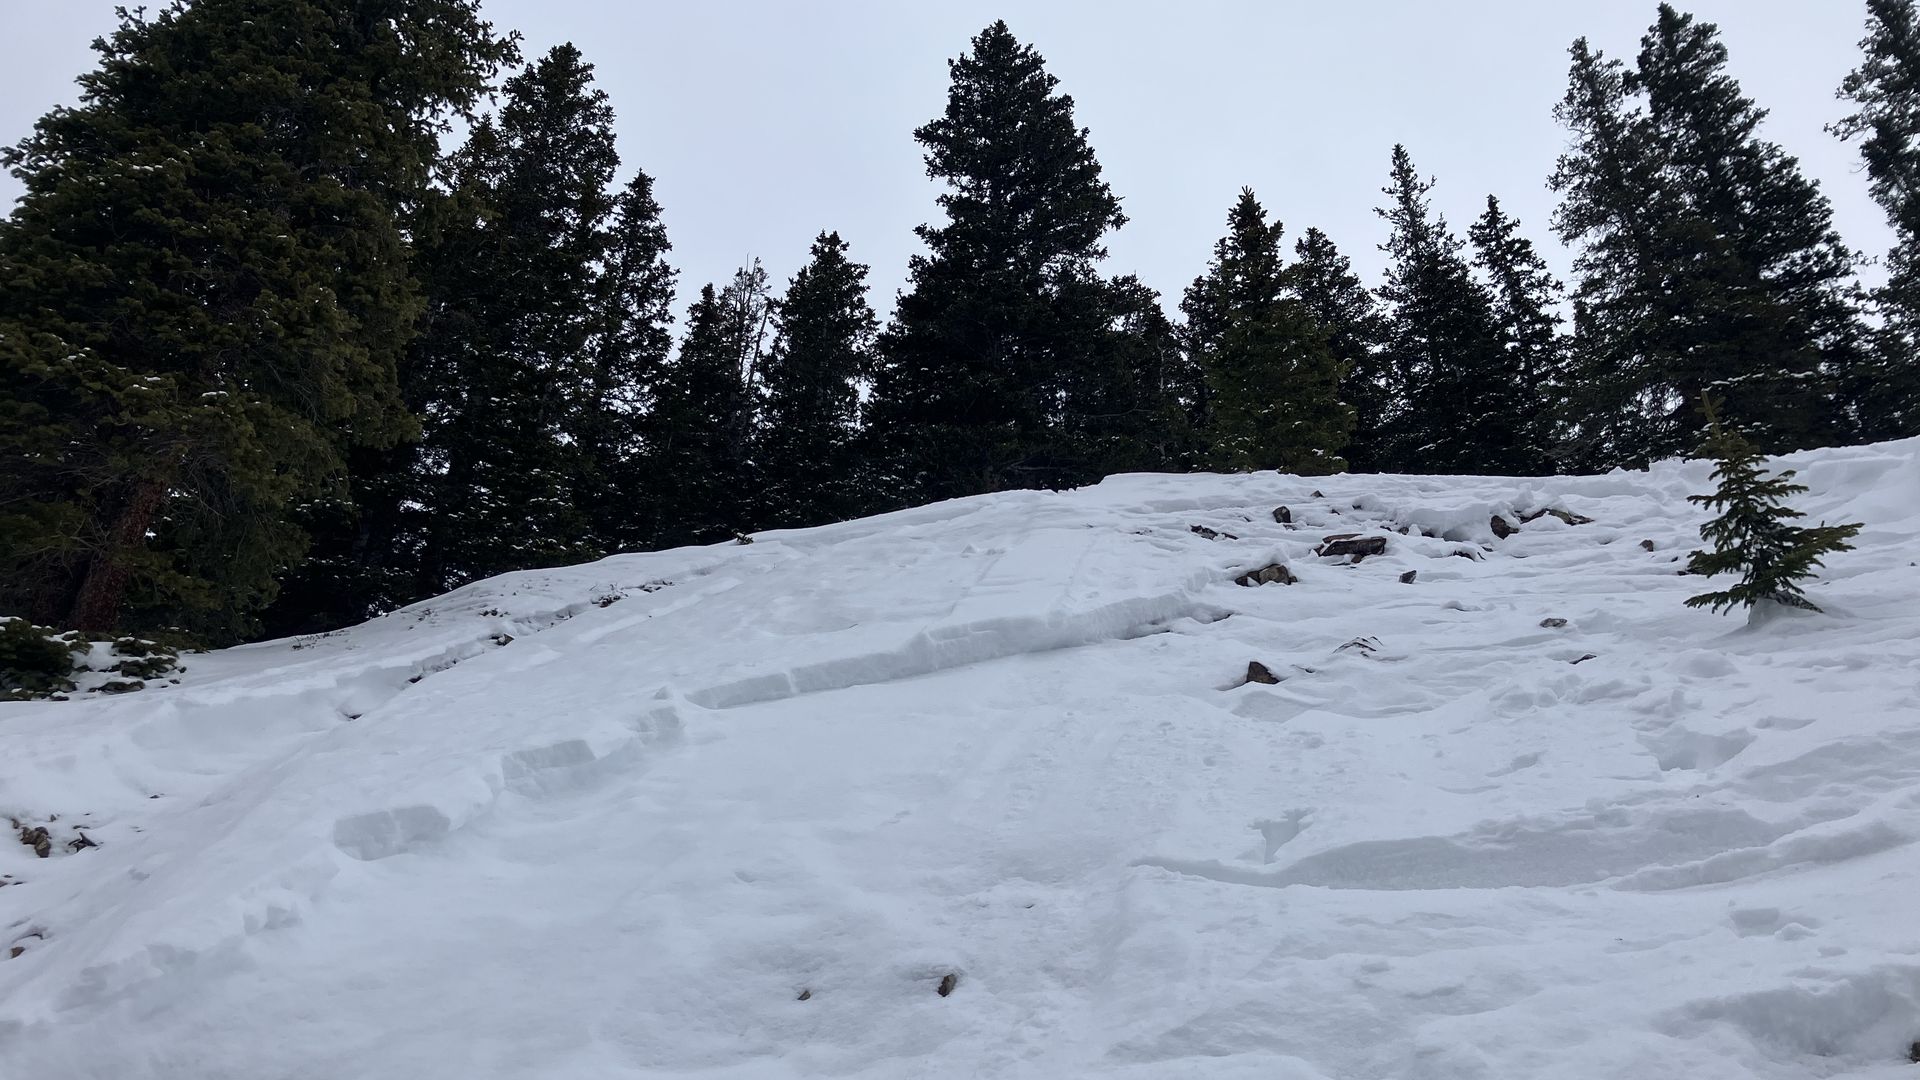 An avalanche in Waterfall Canyon south of Ophir that killed a backcountry snowboarder. Photo courtesy of the Colorado Avalanche Information Center